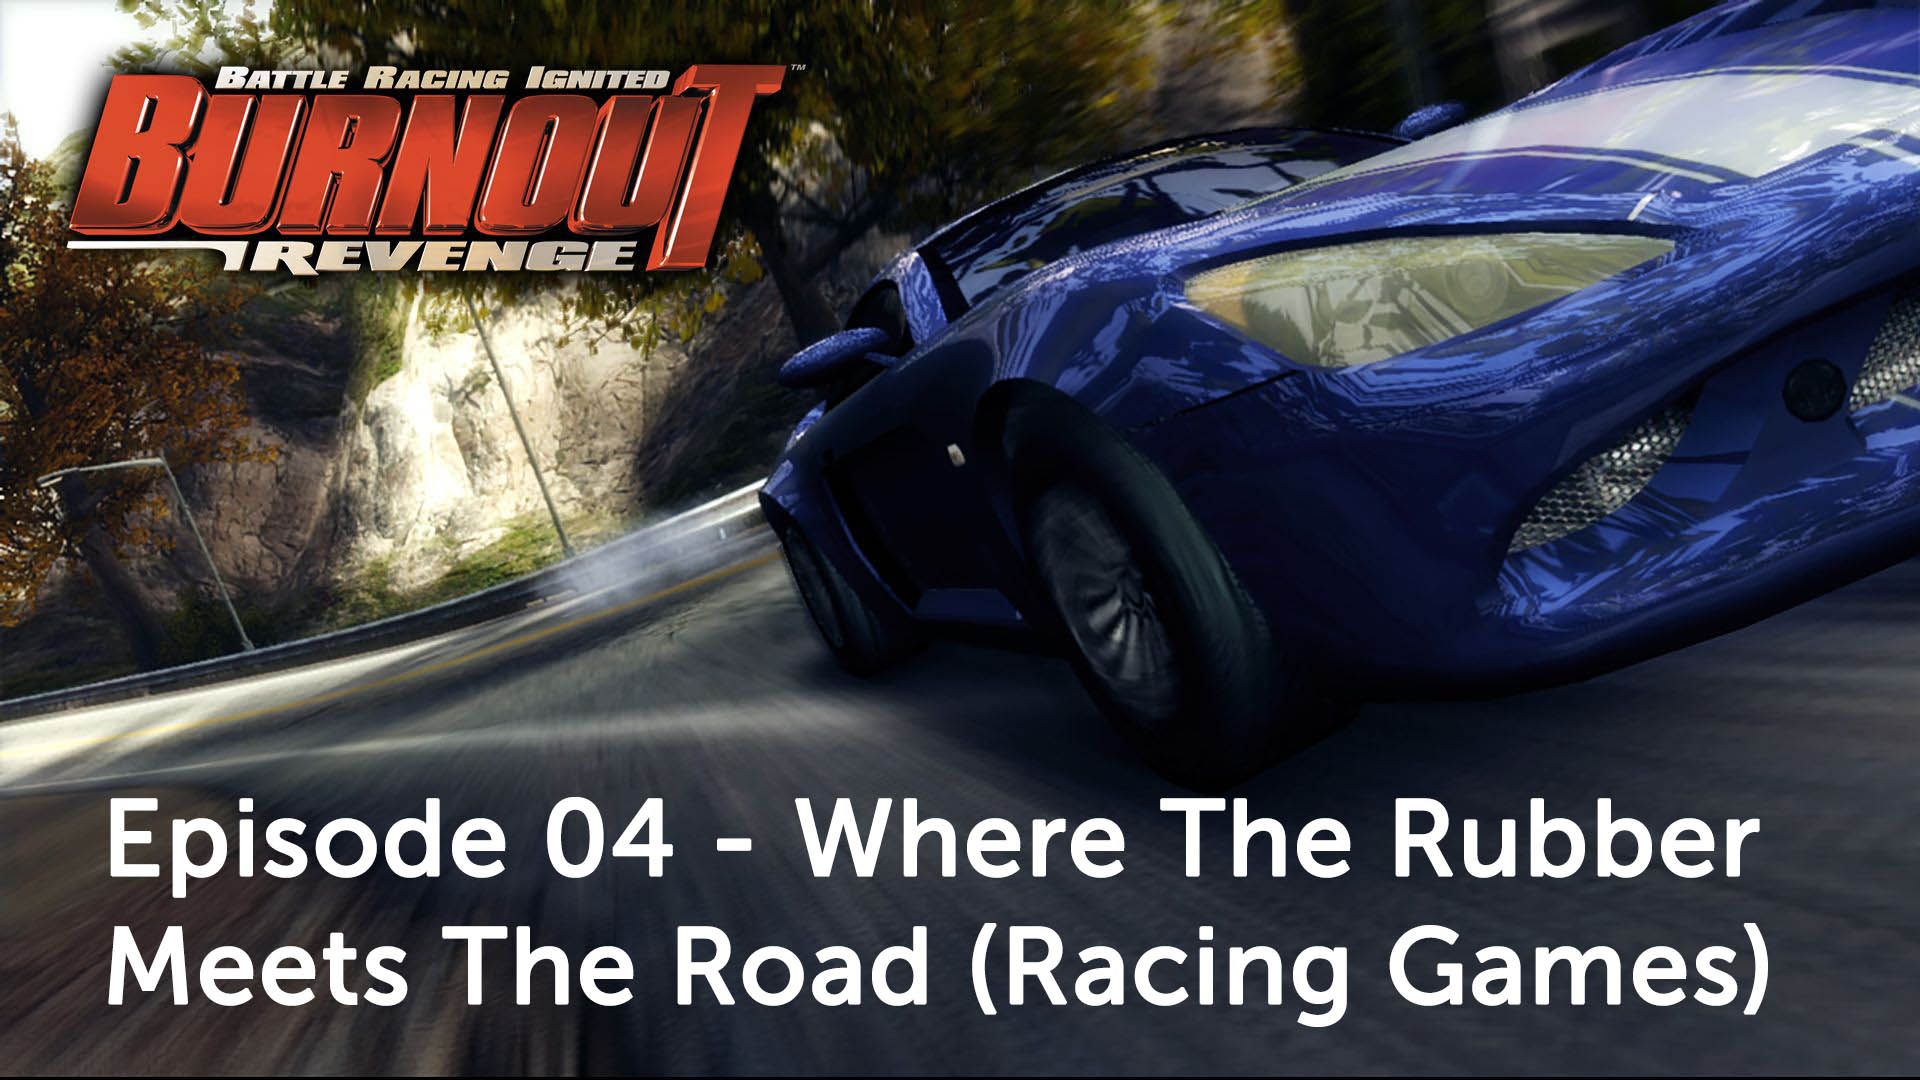 Episode 04 - Where The Rubber Meets The Road (Racing Games)